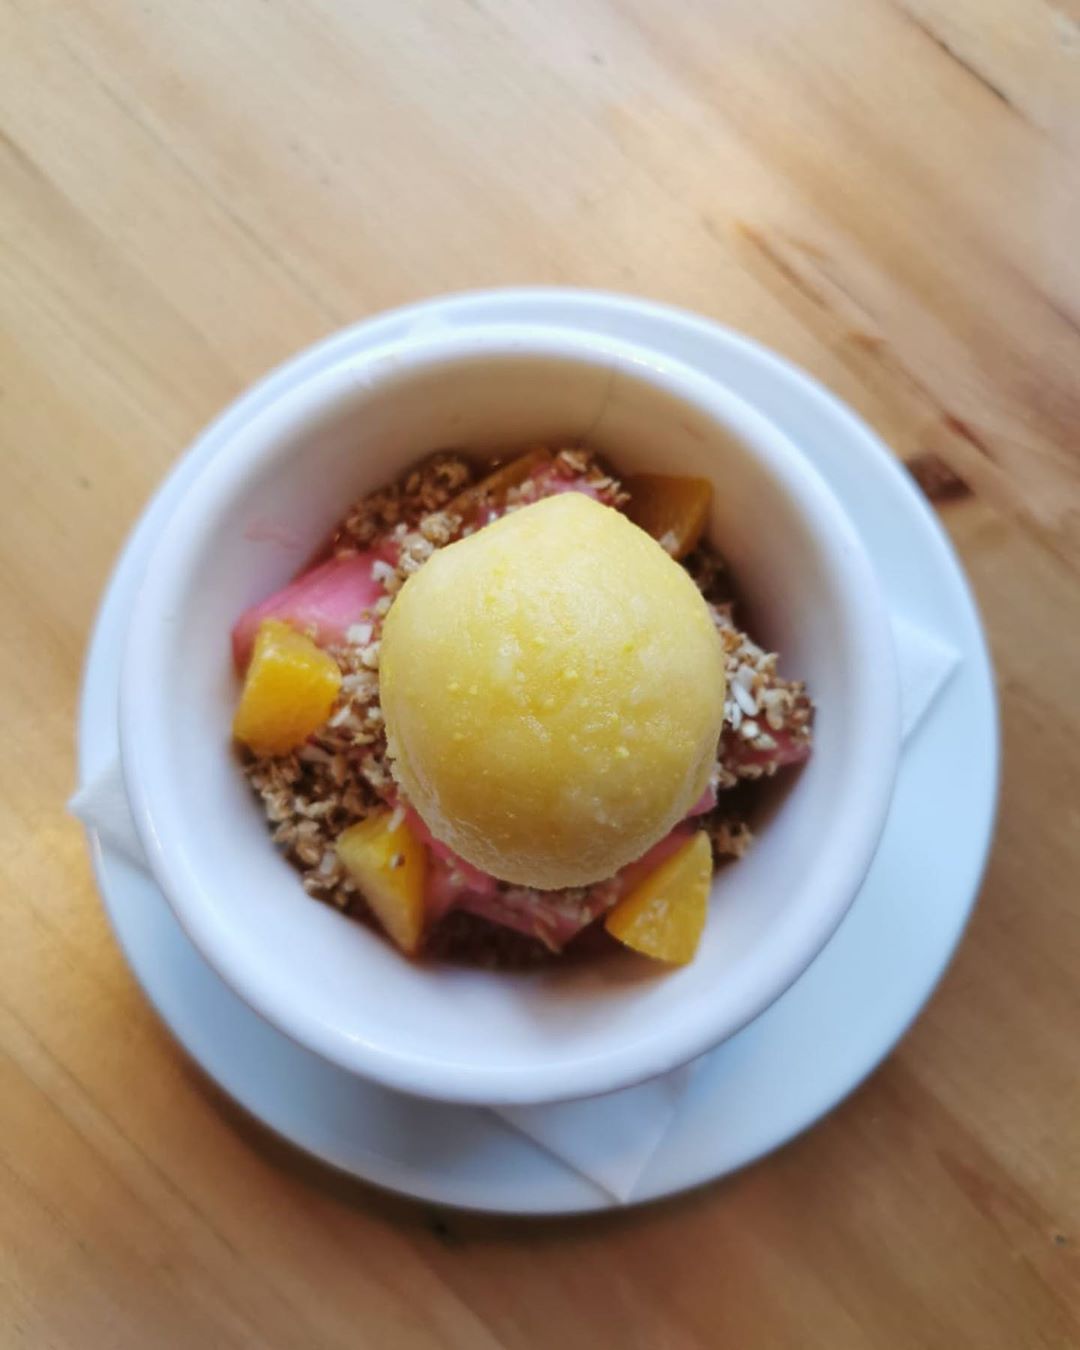 Sweet tooth? We’ve got you covered. Currently at Chapel Row – roasted Yorkshire rhubarb, oat and coconut ‘granola’, mandarin and arbequina olive oil sorbet.